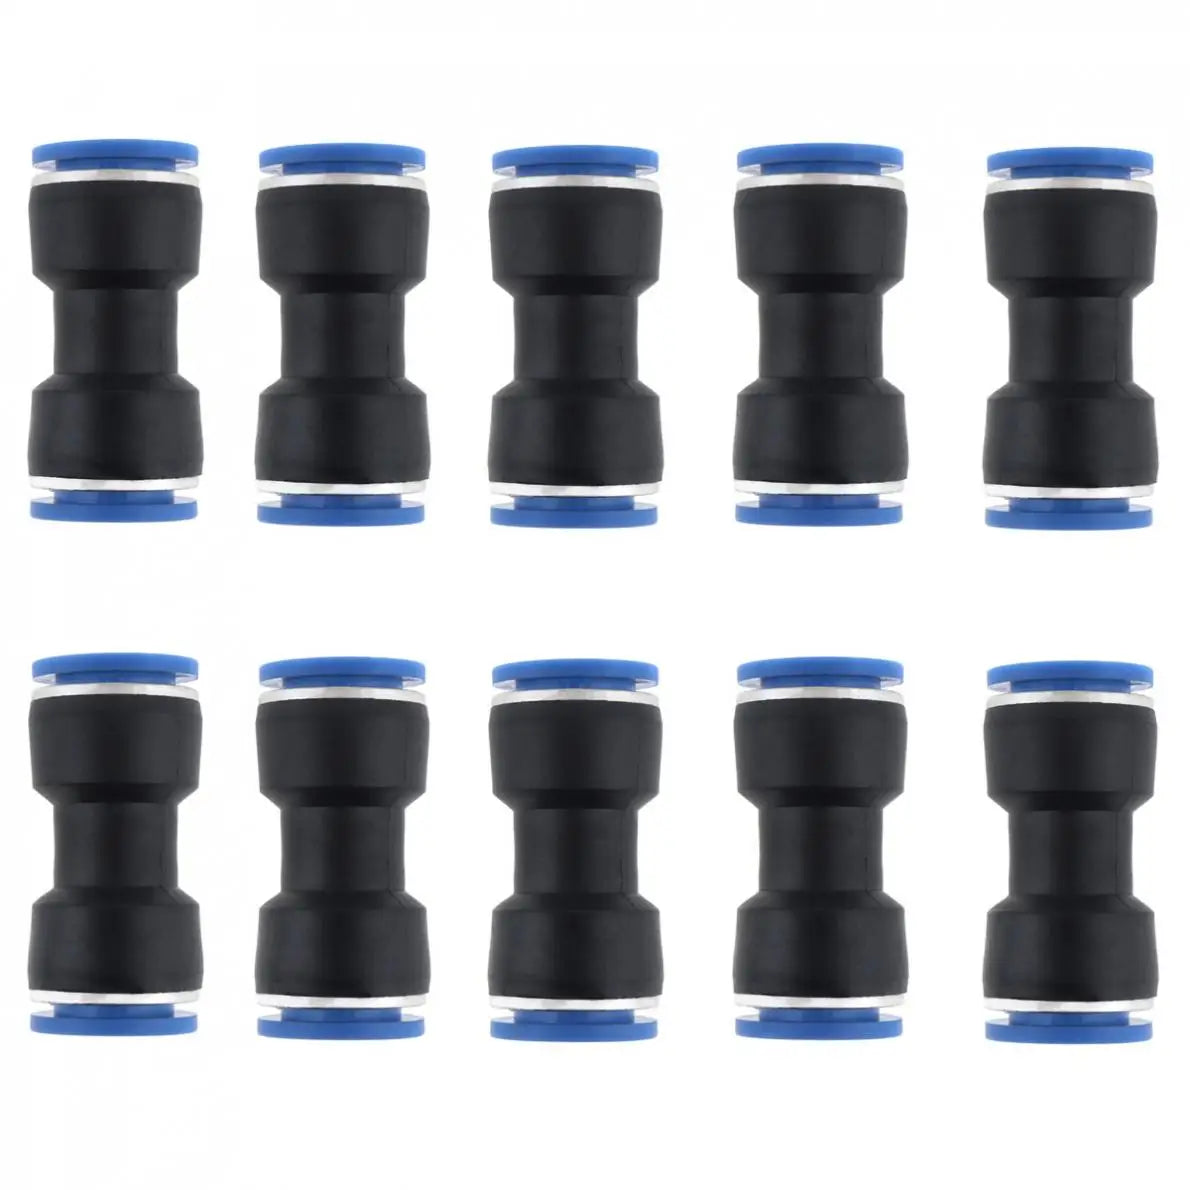 10PCS/lot 14MM PU-14 Plastic Straight Through Quick Connector Pneumatic Insertion Air Tube fit